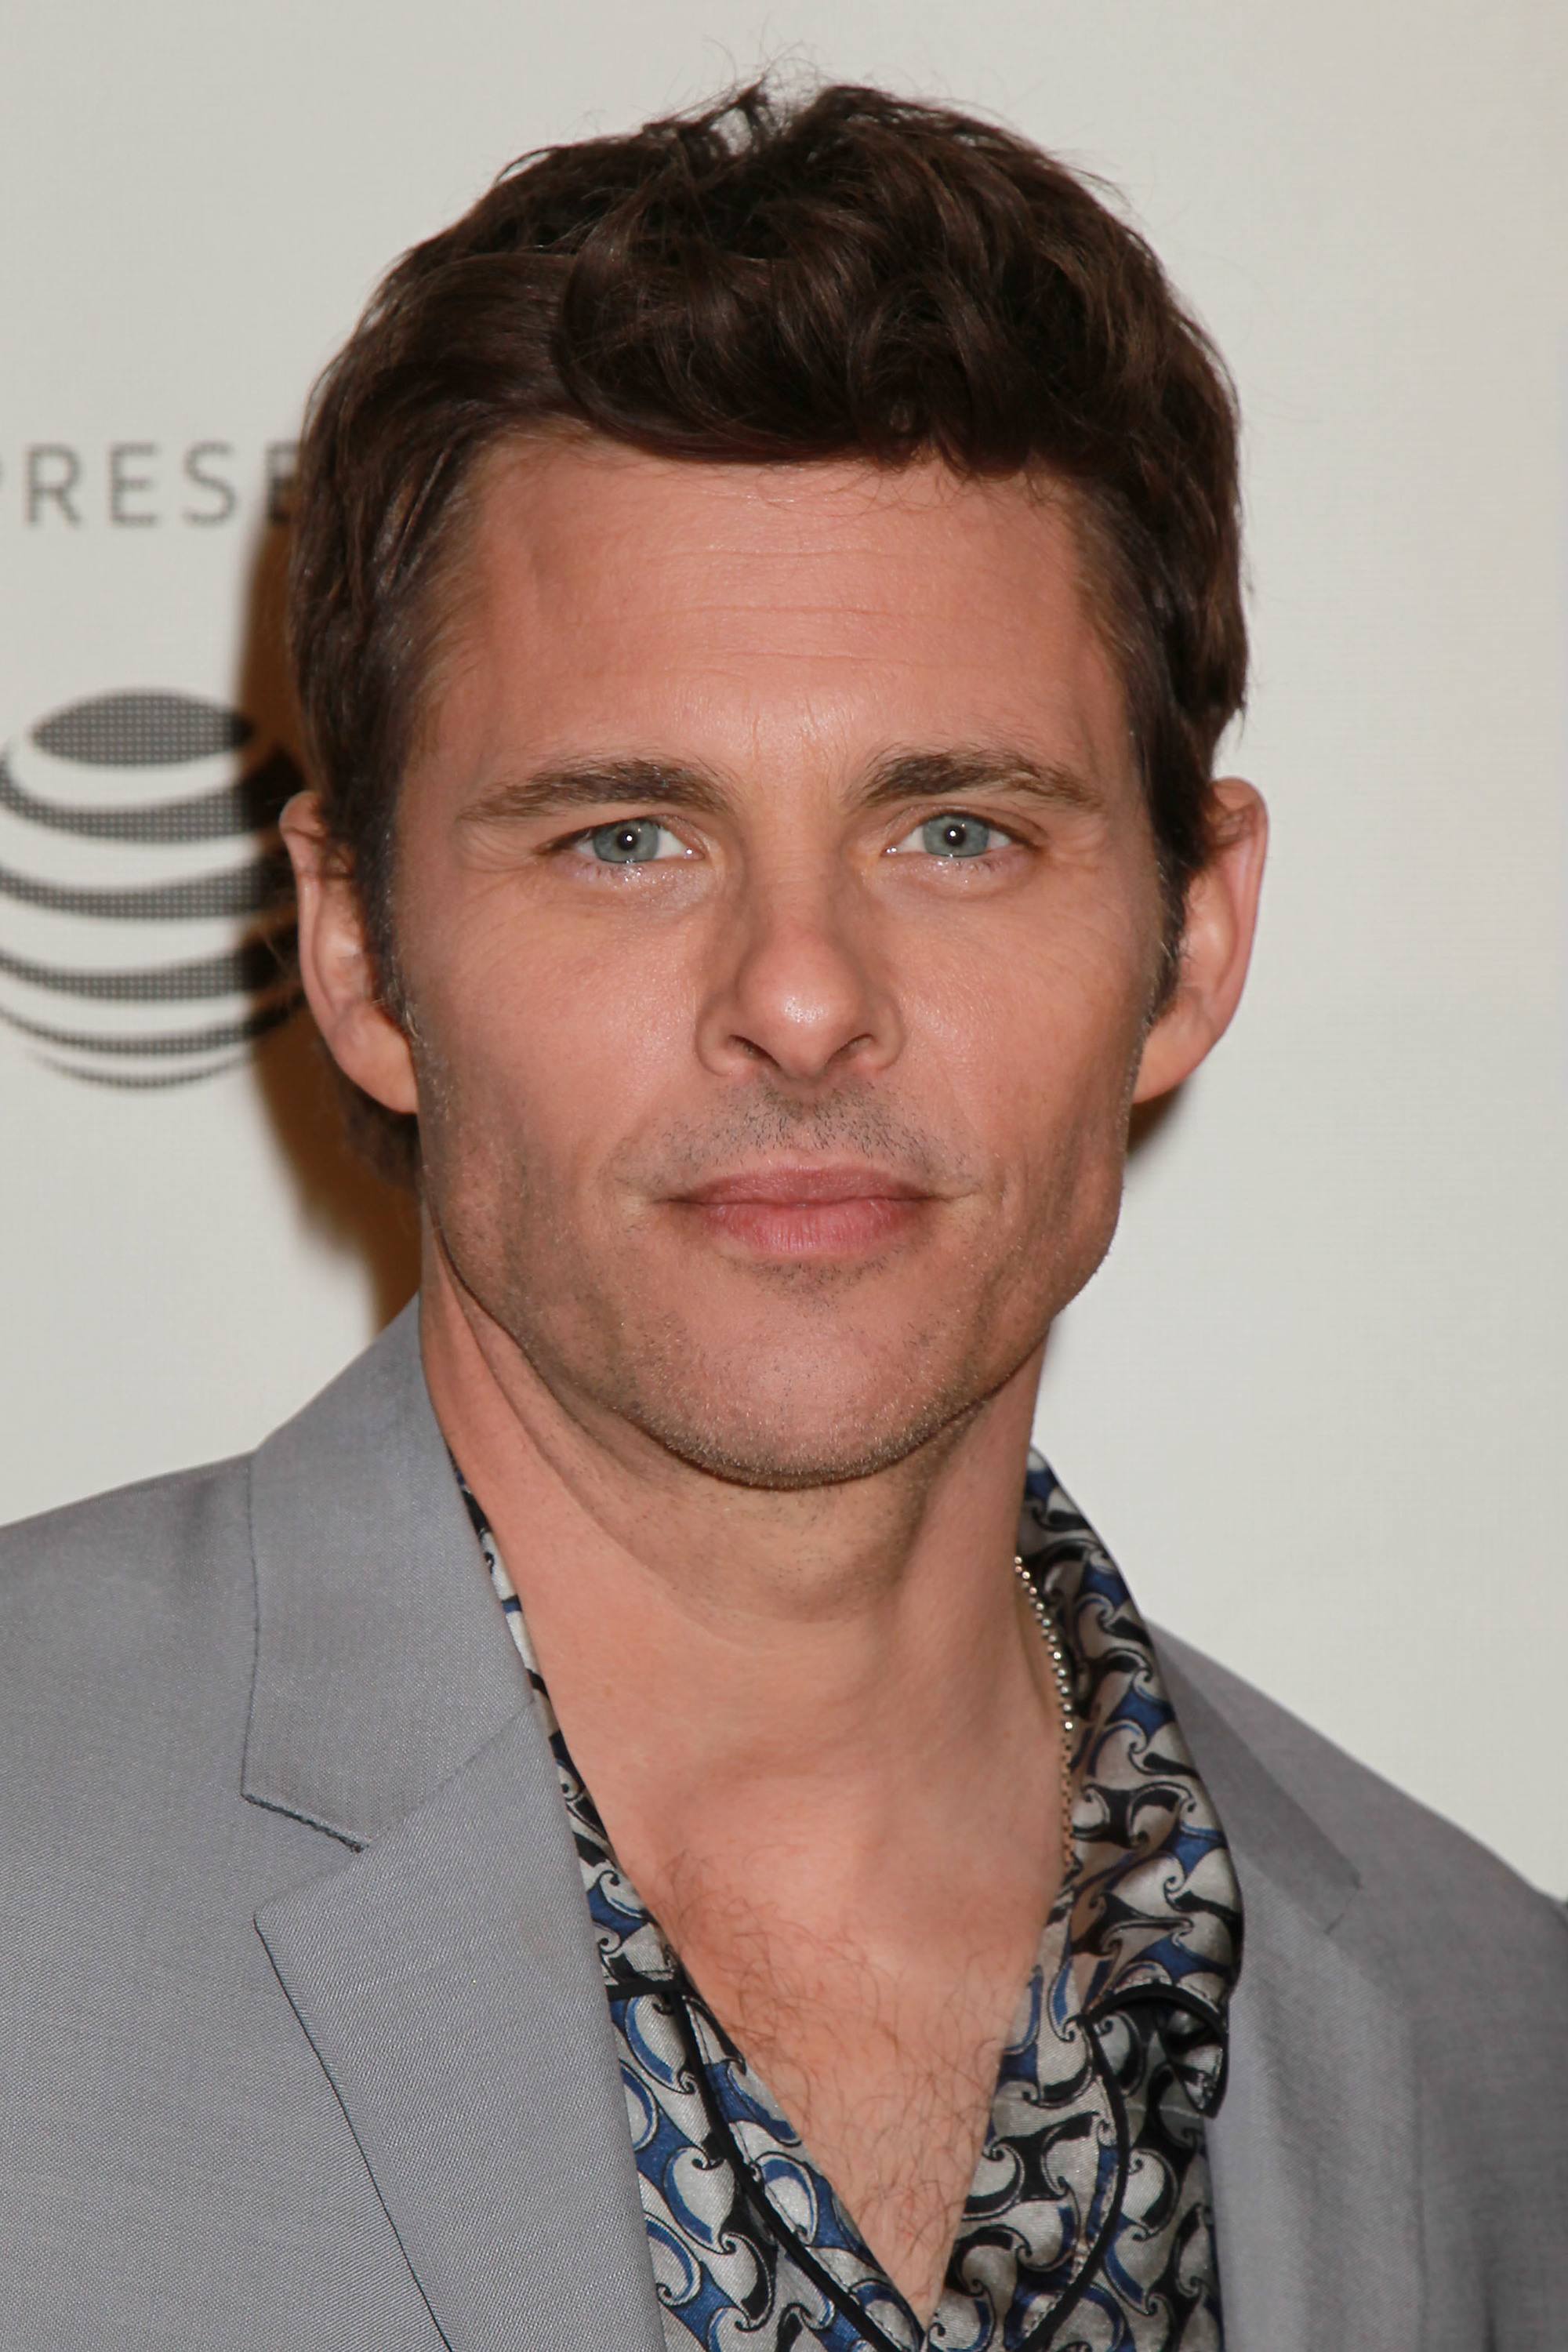 Hairstyles for men over 40: Close-up of James Marsden with textured brown hair